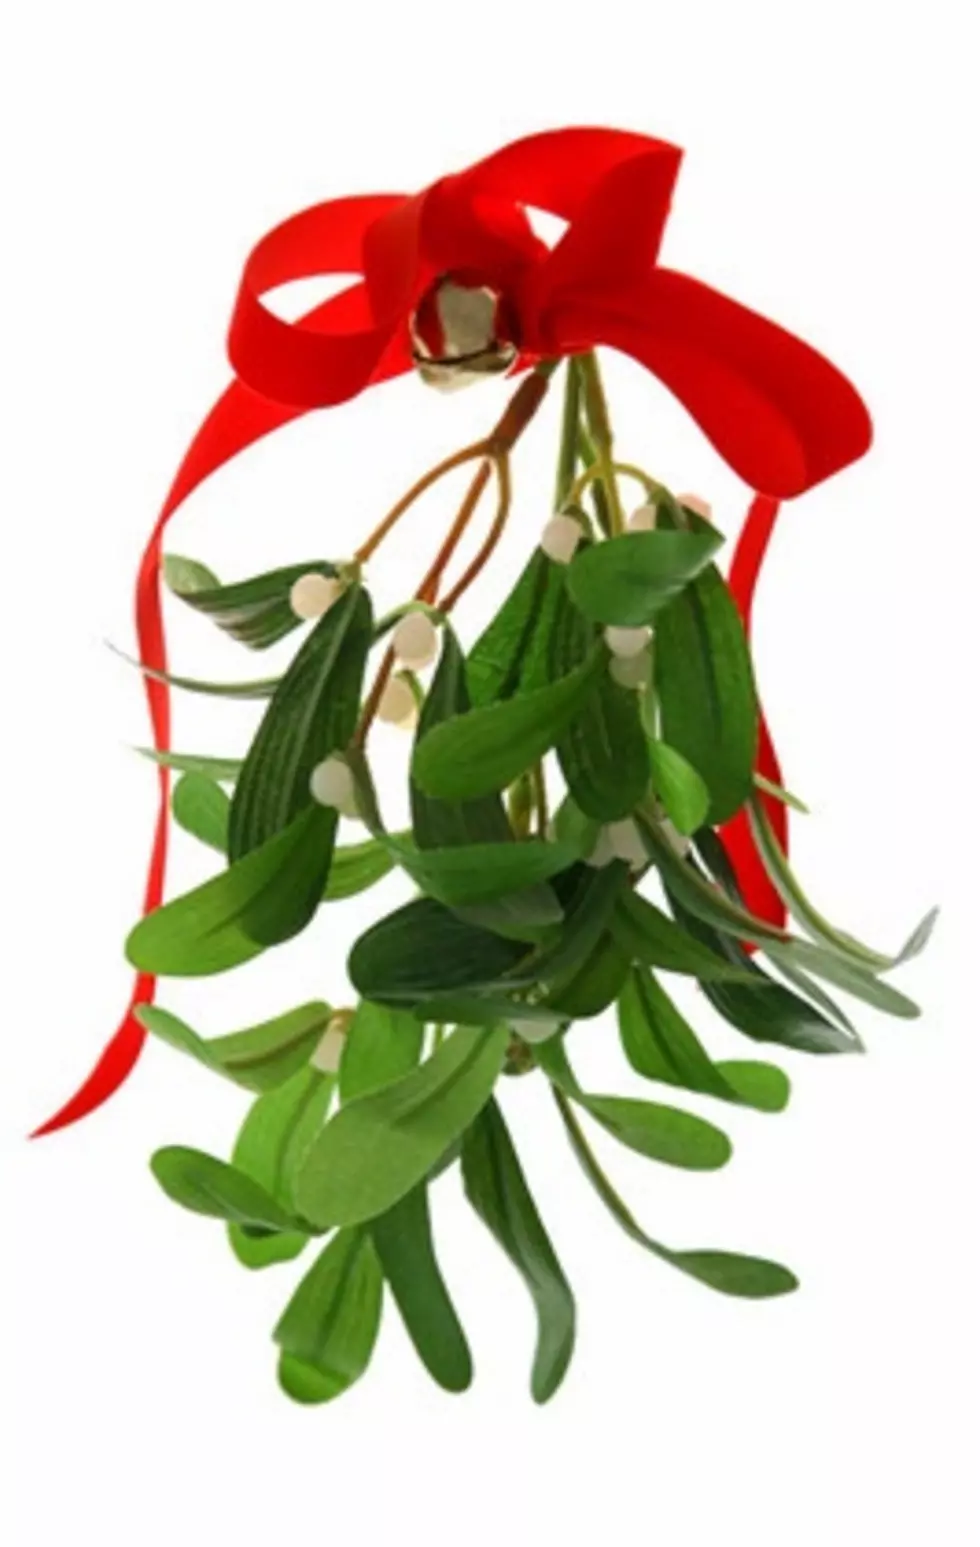 Win Prizes With The 3rd Annual Downtown El Paso Mistletoe Kiss Contest